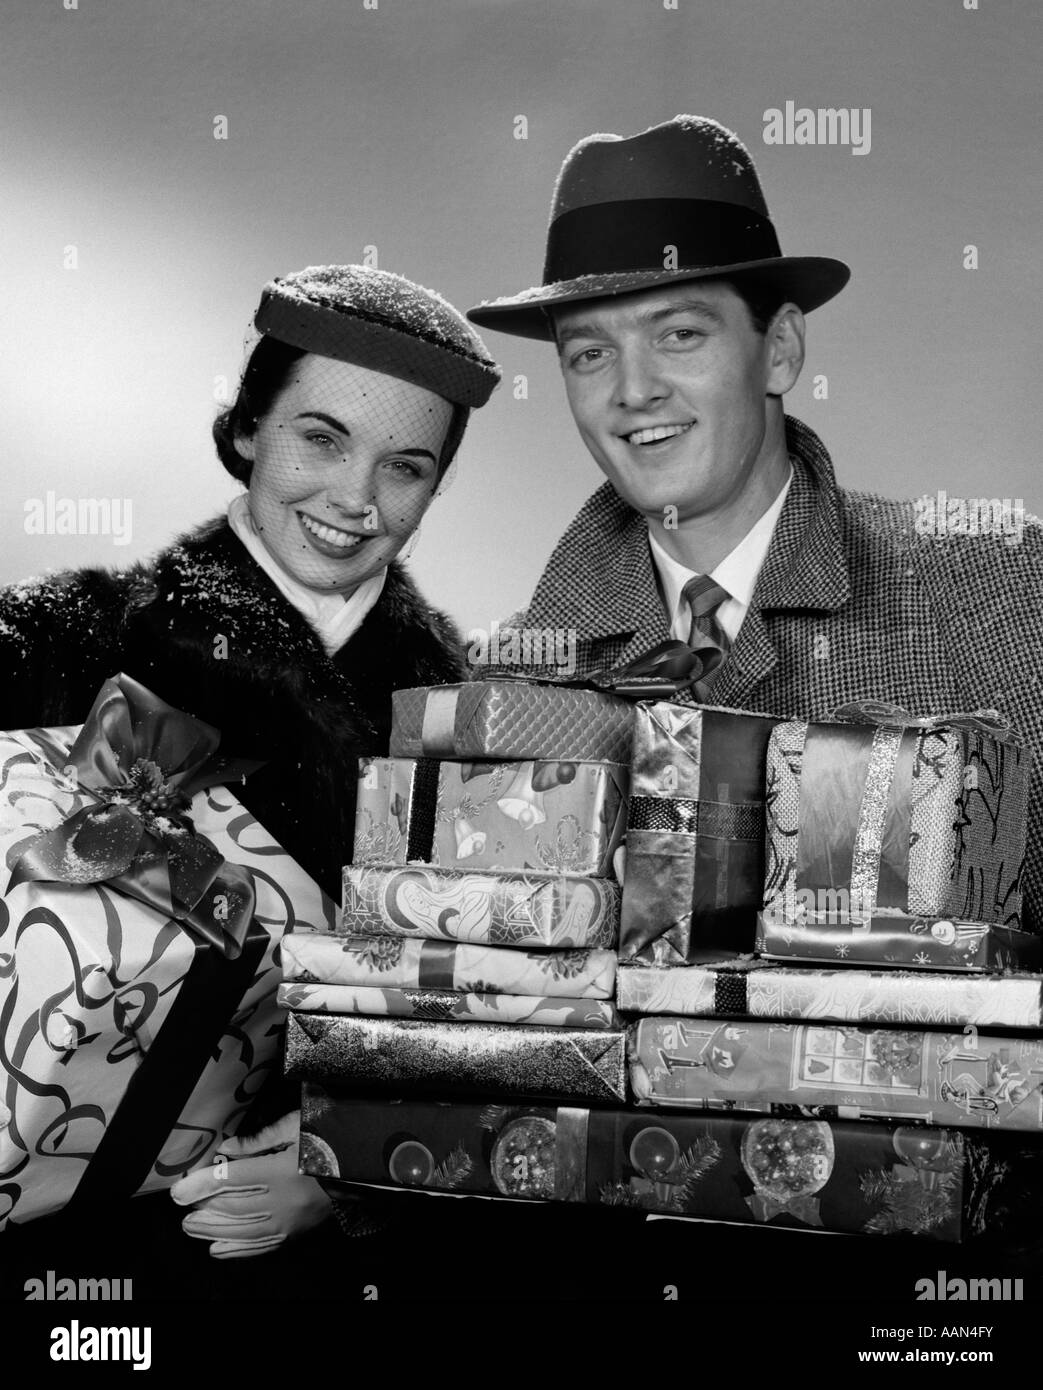 1950s 1960s SMILING PORTRAIT COUPLE IN WINTER COATS & HATS HOLDING WRAPPED CHRISTMAS GIFTS LOOKING AT CAMERA Stock Photo